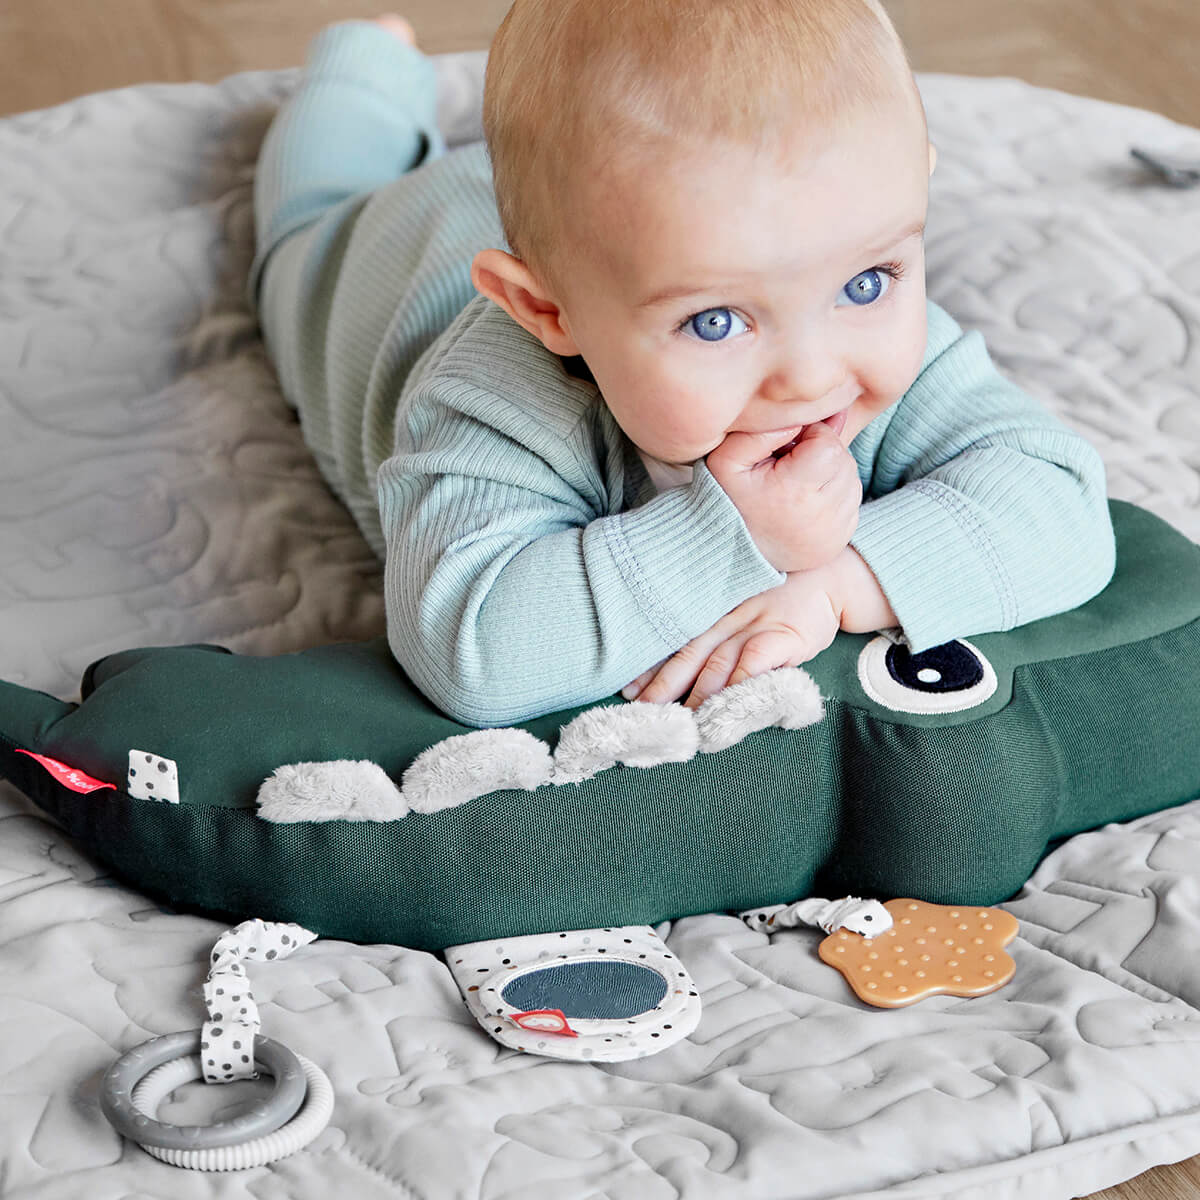 Done by Deer Croco Tummy Time Activity Toy Green - Tiny Tots Baby Store 